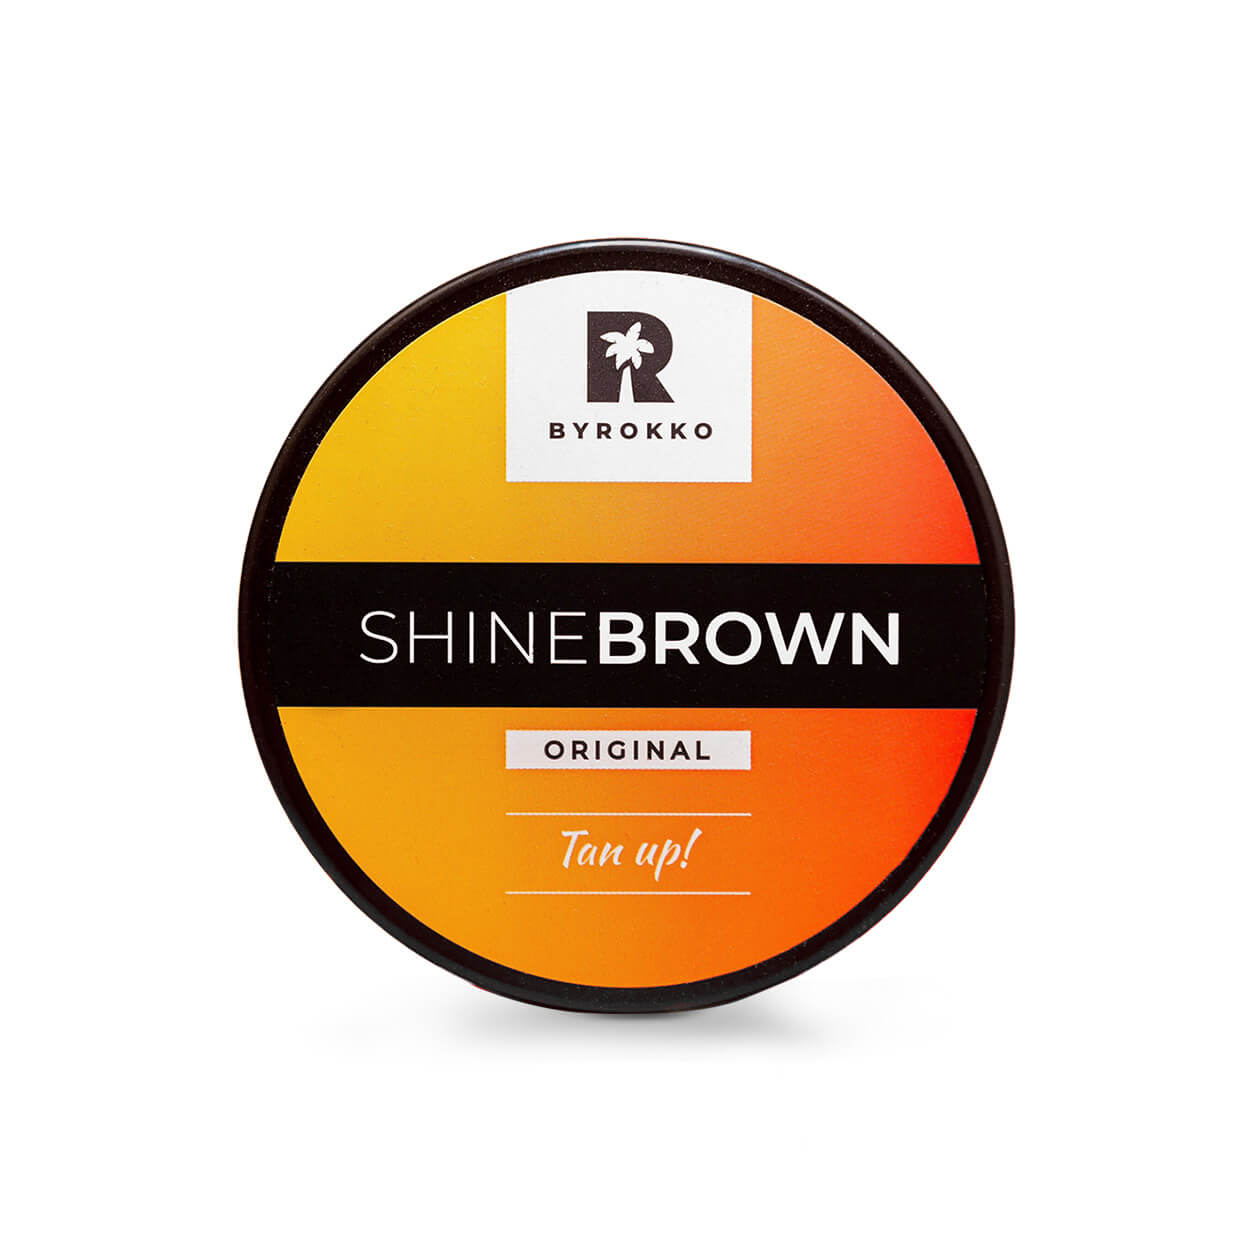 Shine Brown Tan up! Premium cream for natural, faster, and darker tanning.